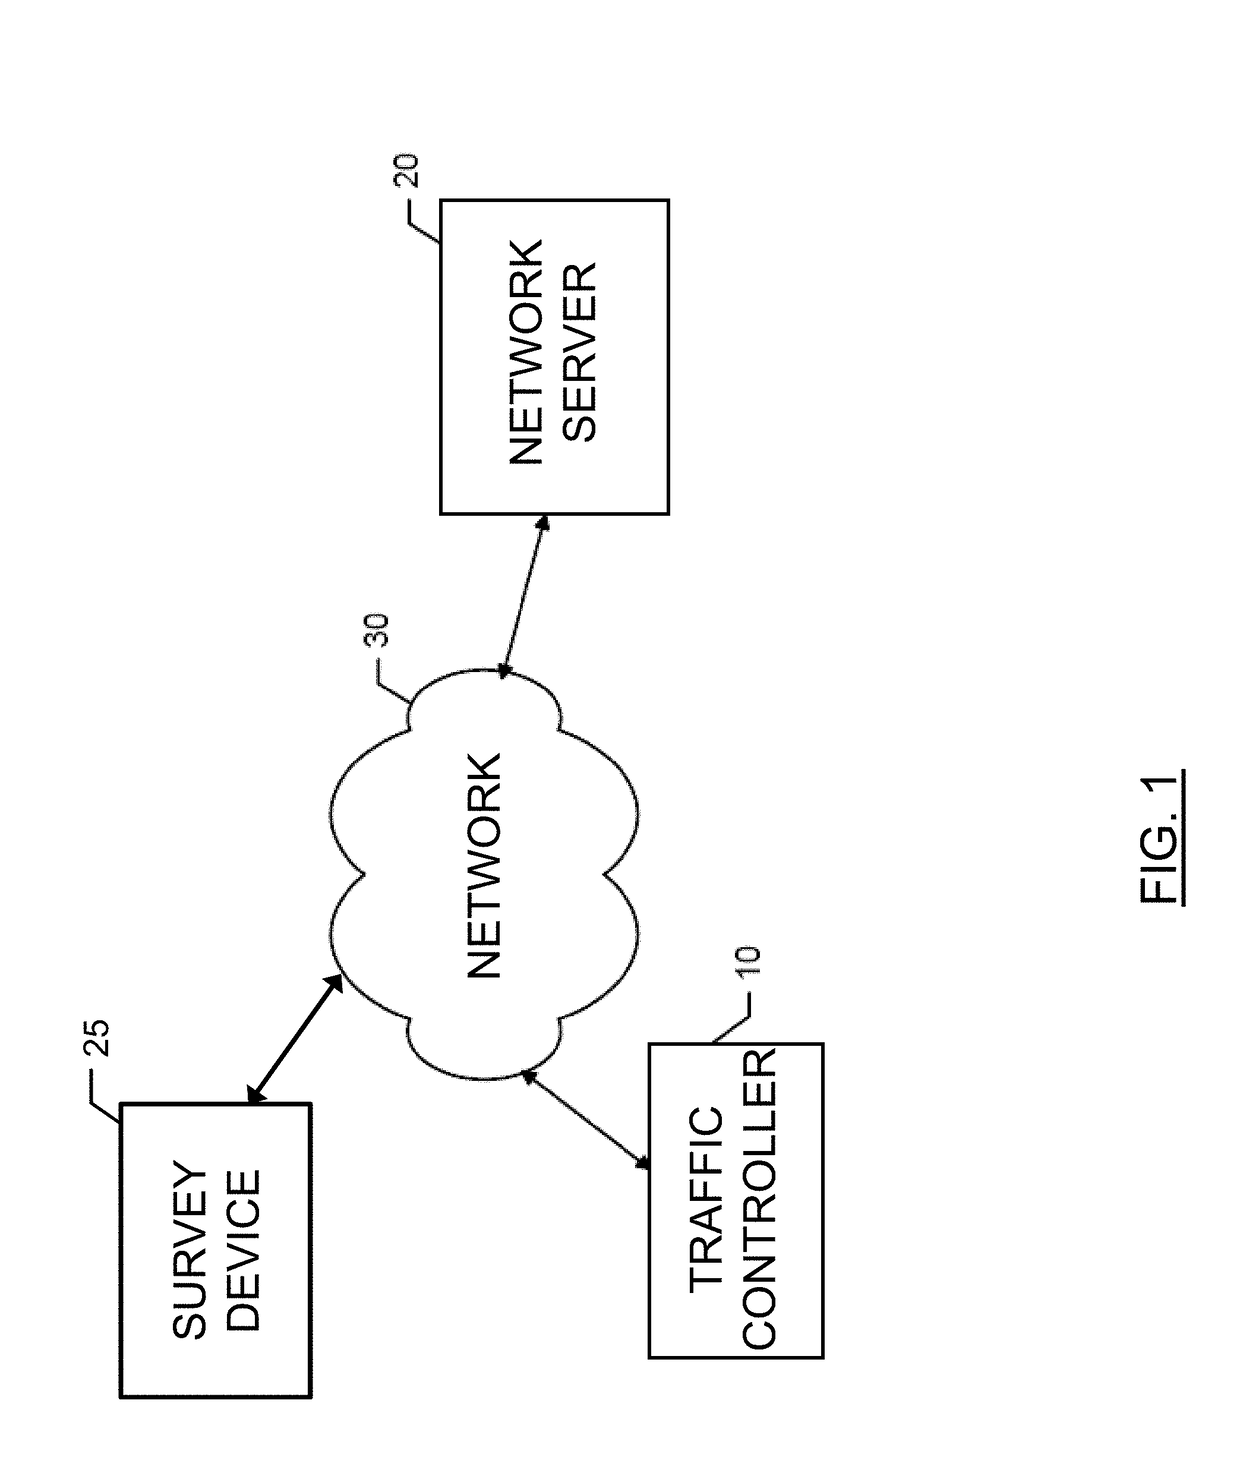 Method, apparatus and computer program product for indexing traffic lanes for signal control and traffic flow management